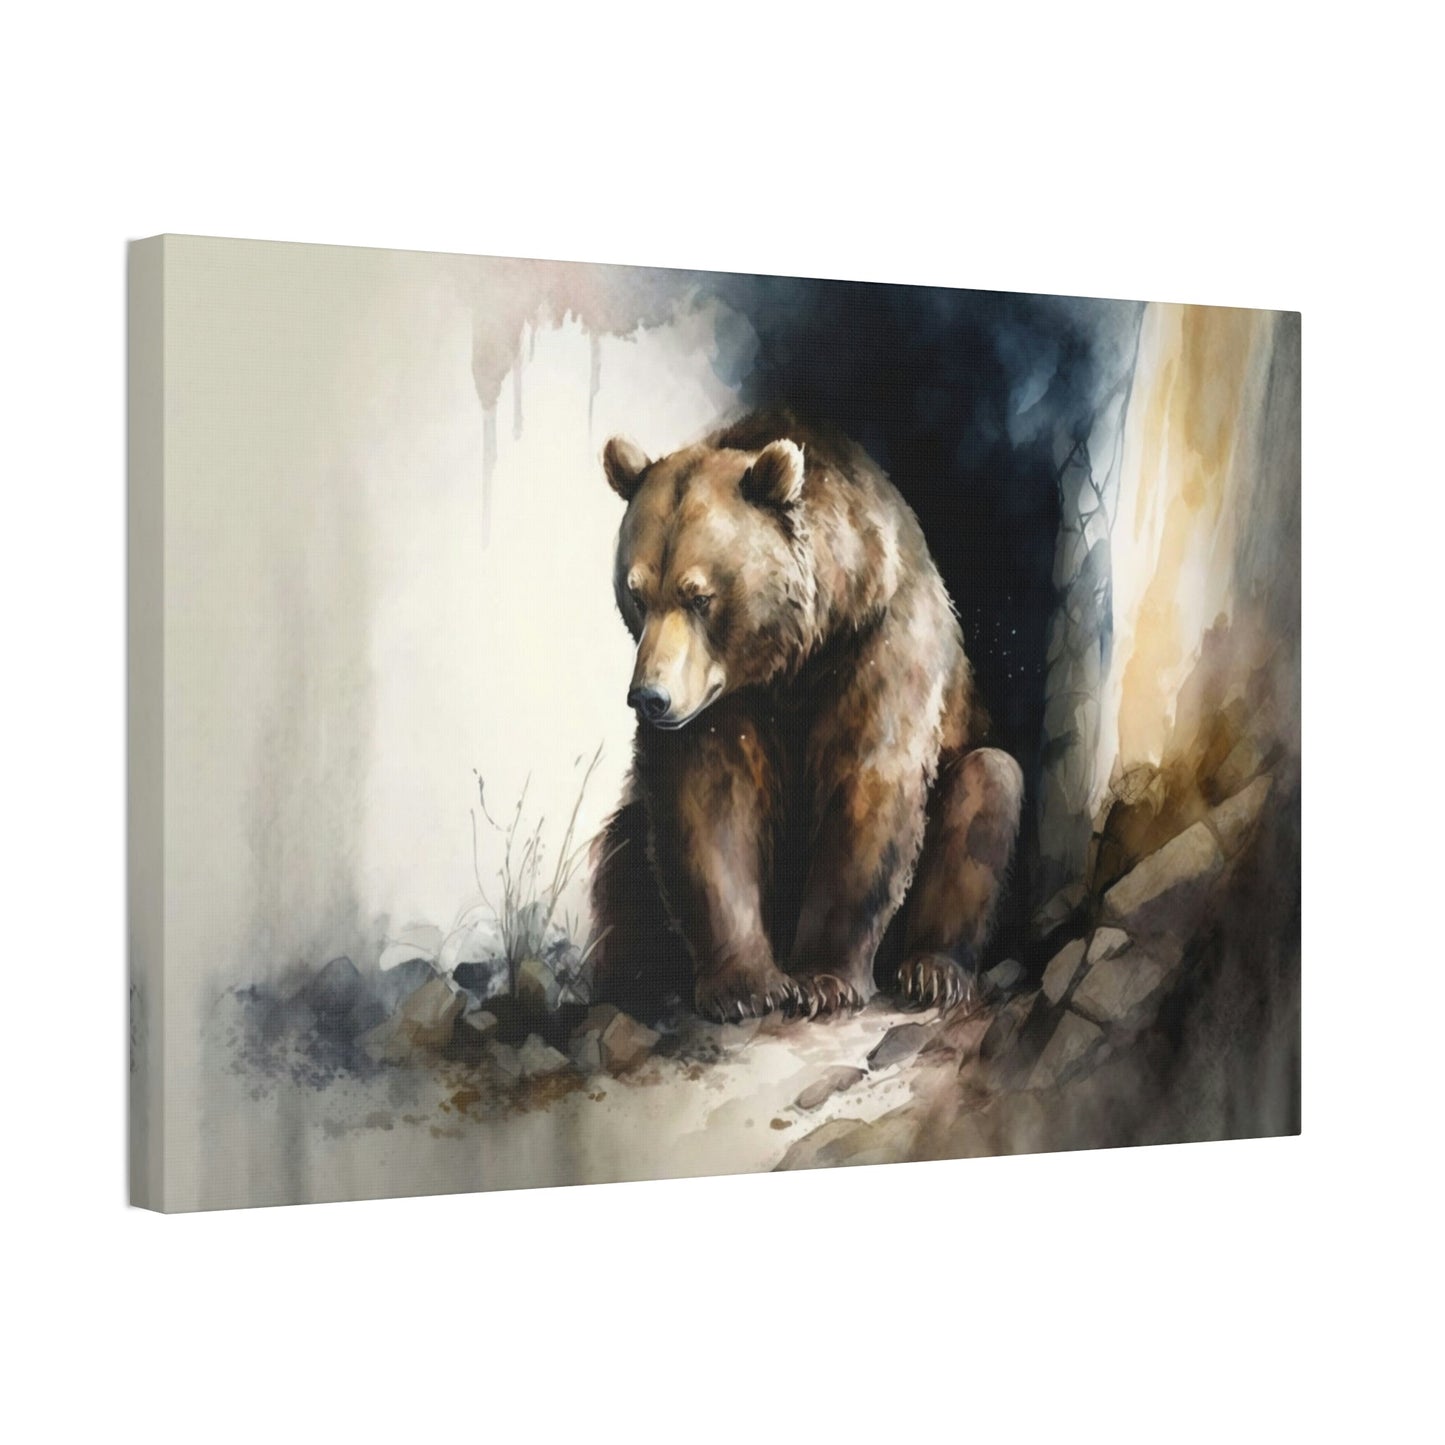 The Watchful Eye: Natural Canvas & Poster Print of a Grizzly Bear in the Wild